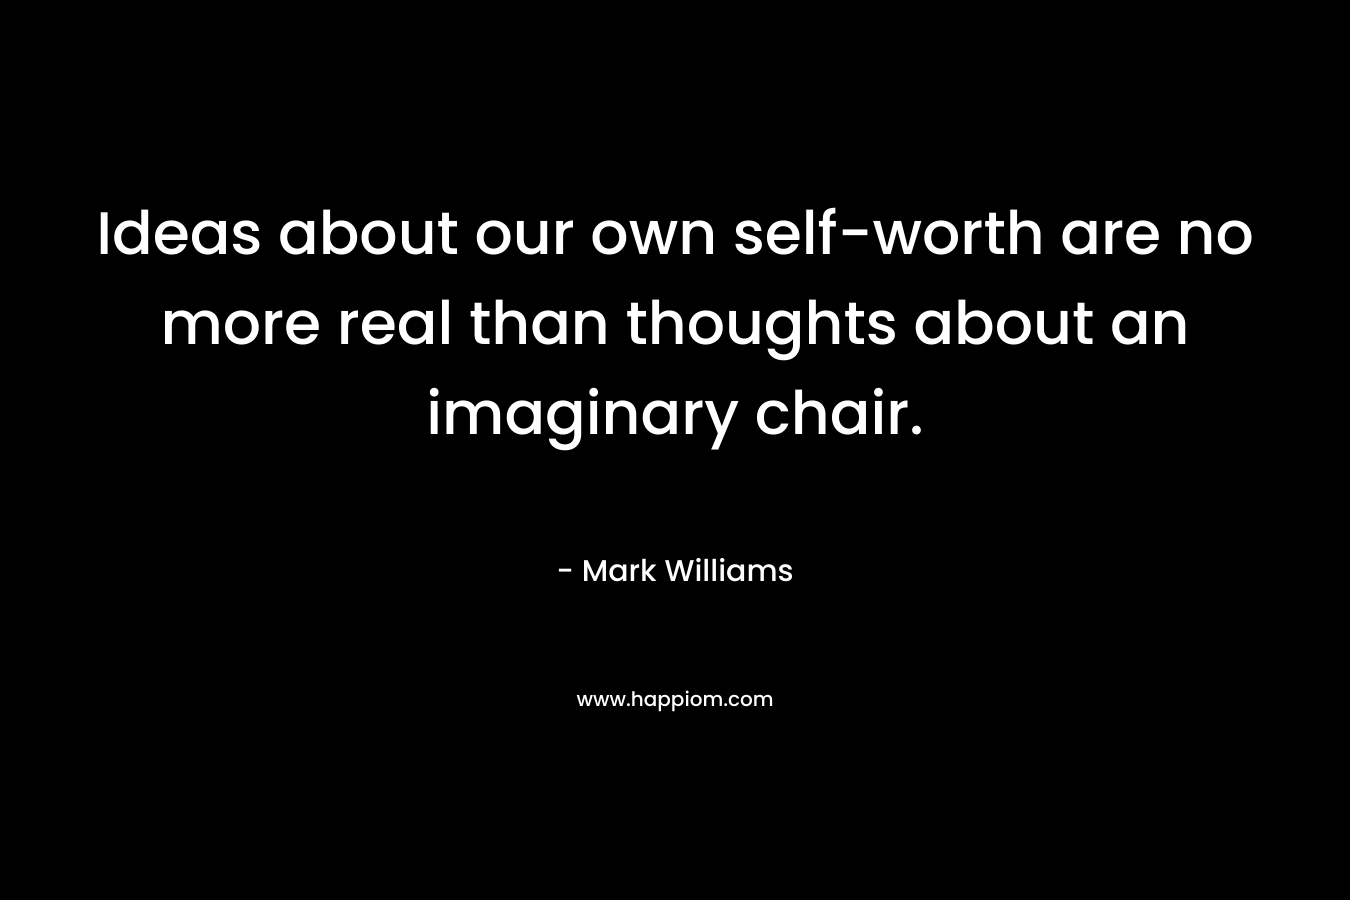 Ideas about our own self-worth are no more real than thoughts about an imaginary chair. – Mark Williams